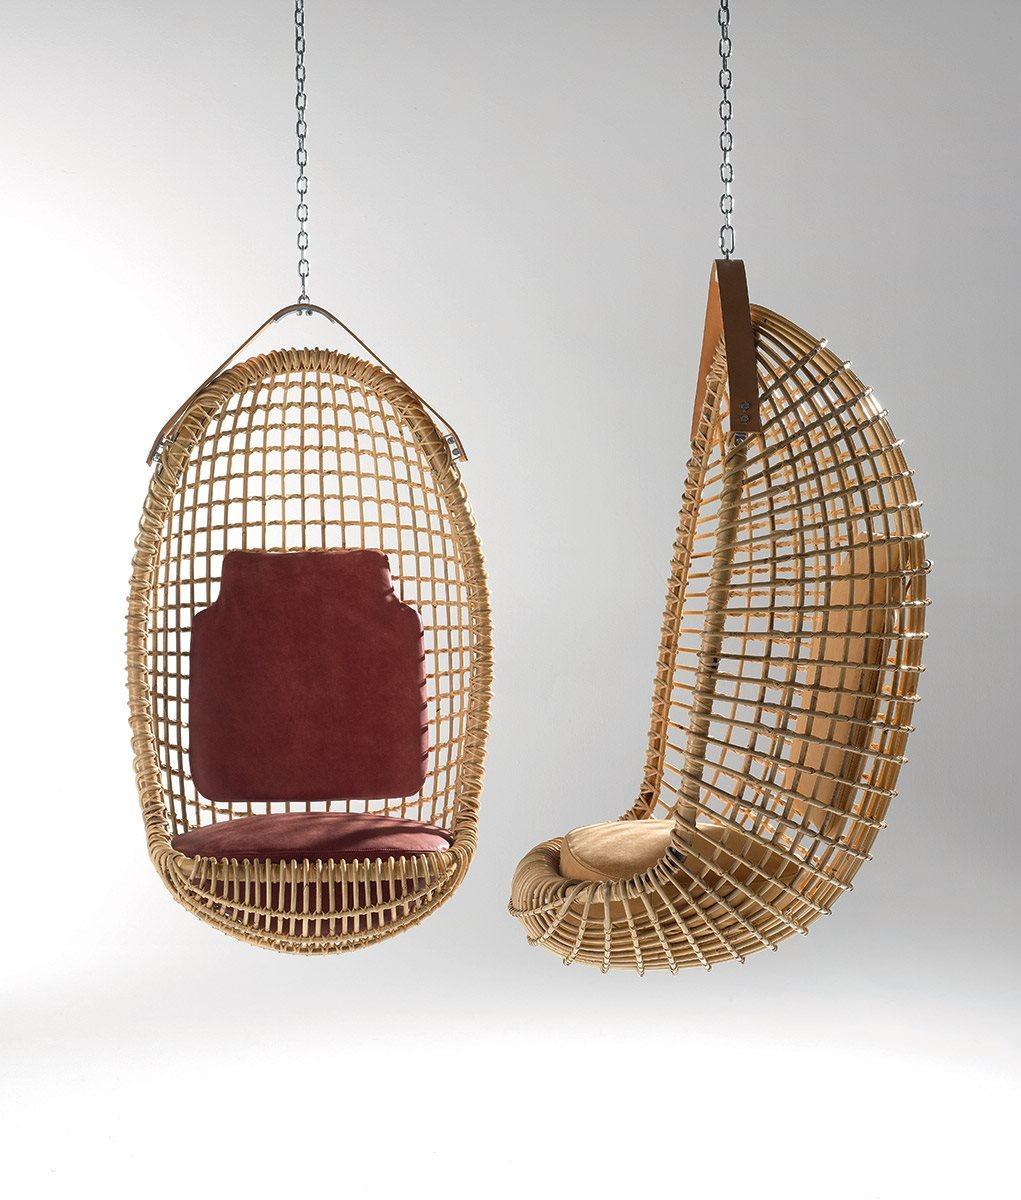 Design by Giovanni Travasa for Bonacina 1889, 1958.
The organic forms of the armchairs designed by Travasa welcome and embrace the human body, while maintaining, at the same time, a lightness given by the weave and material. The famous hanging